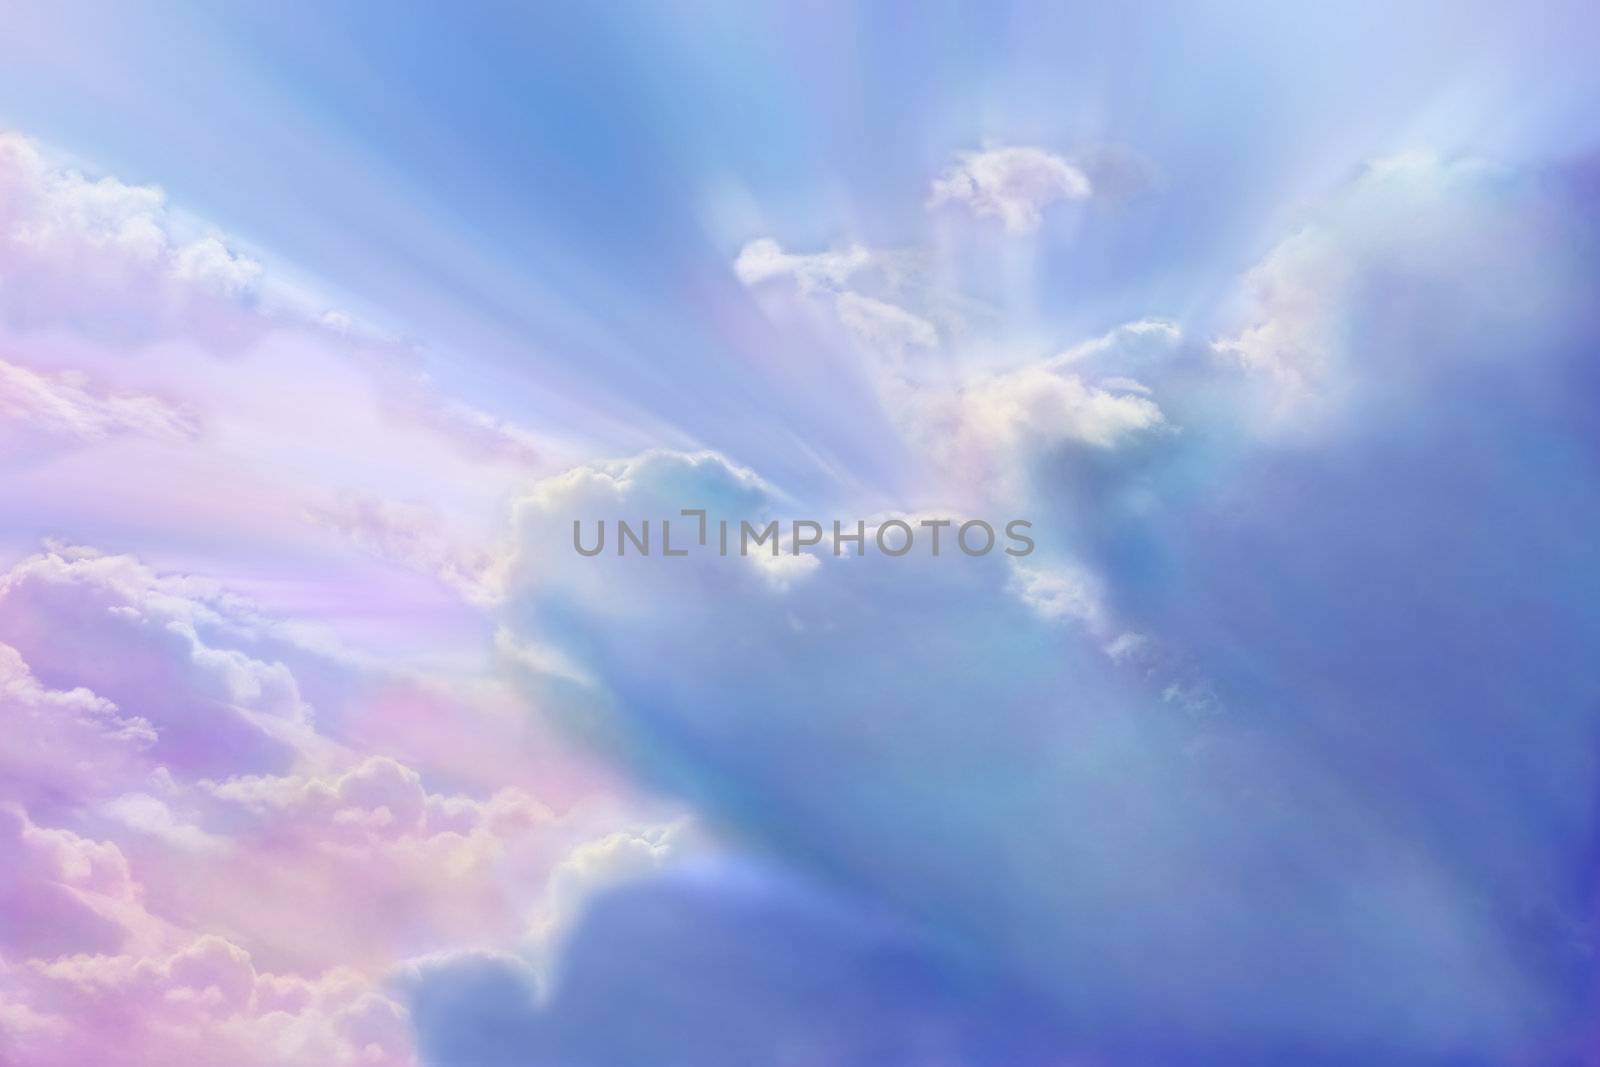 Clouds with multi colored sunlight streaming through